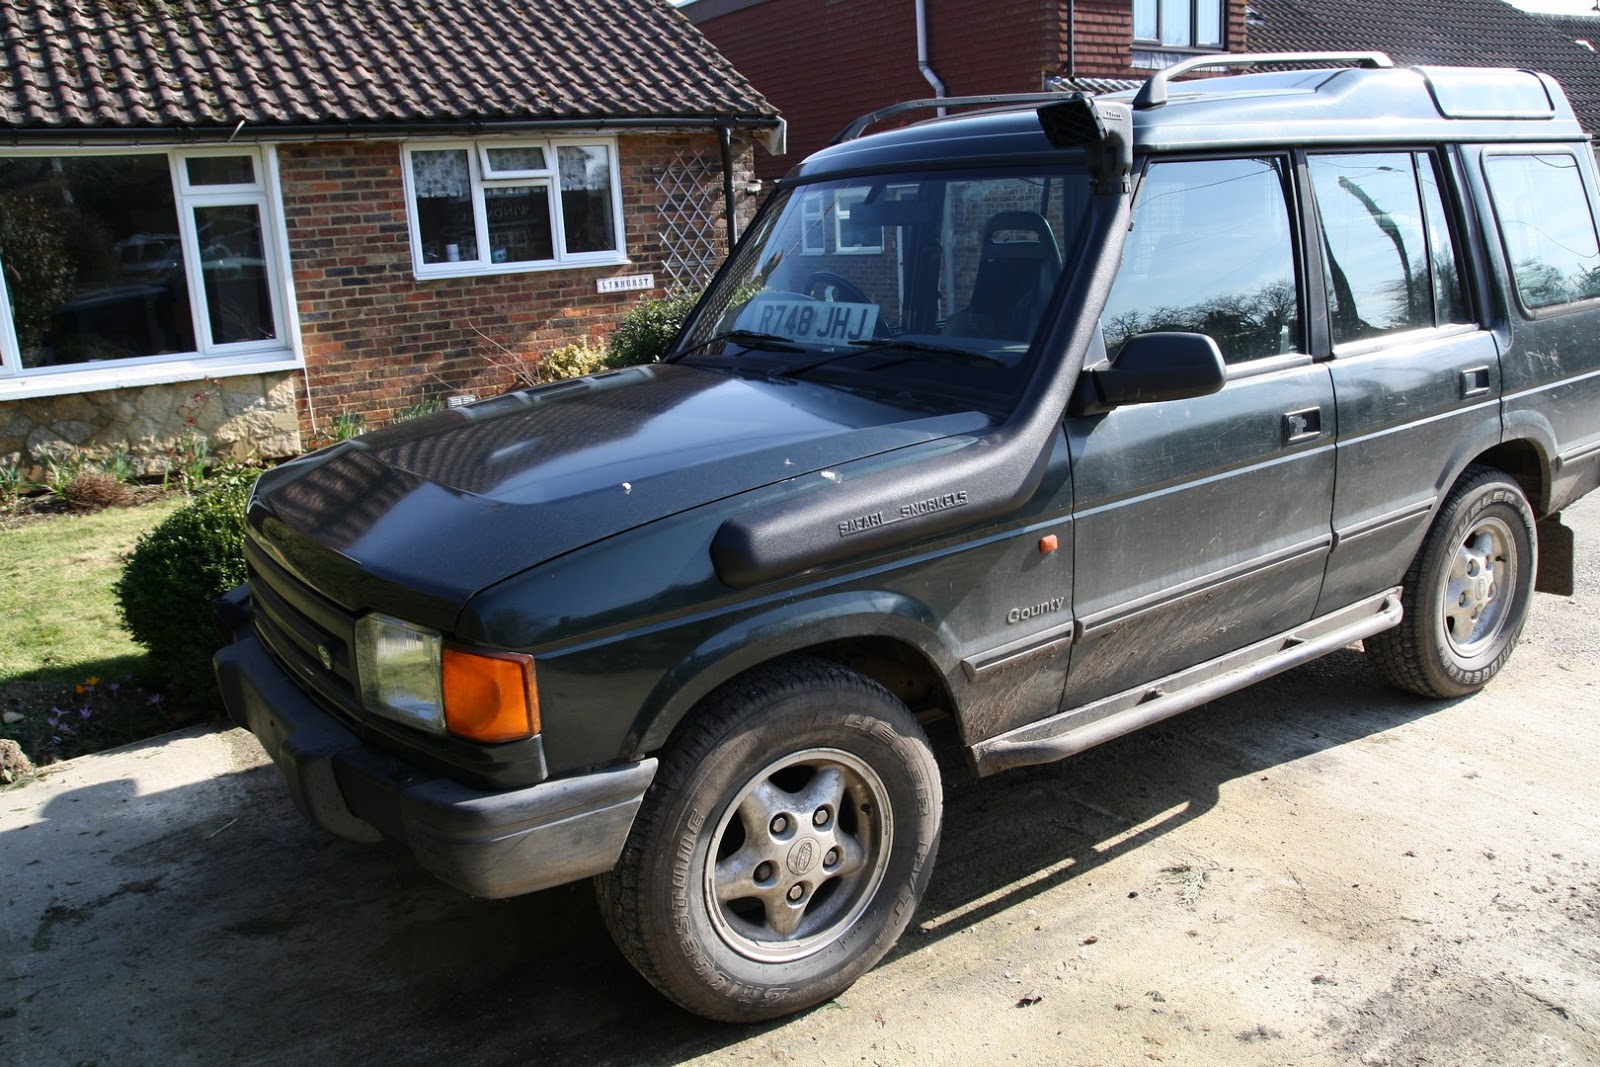 "Living with Larry" my Land Rover Discovery 1 300TDI and